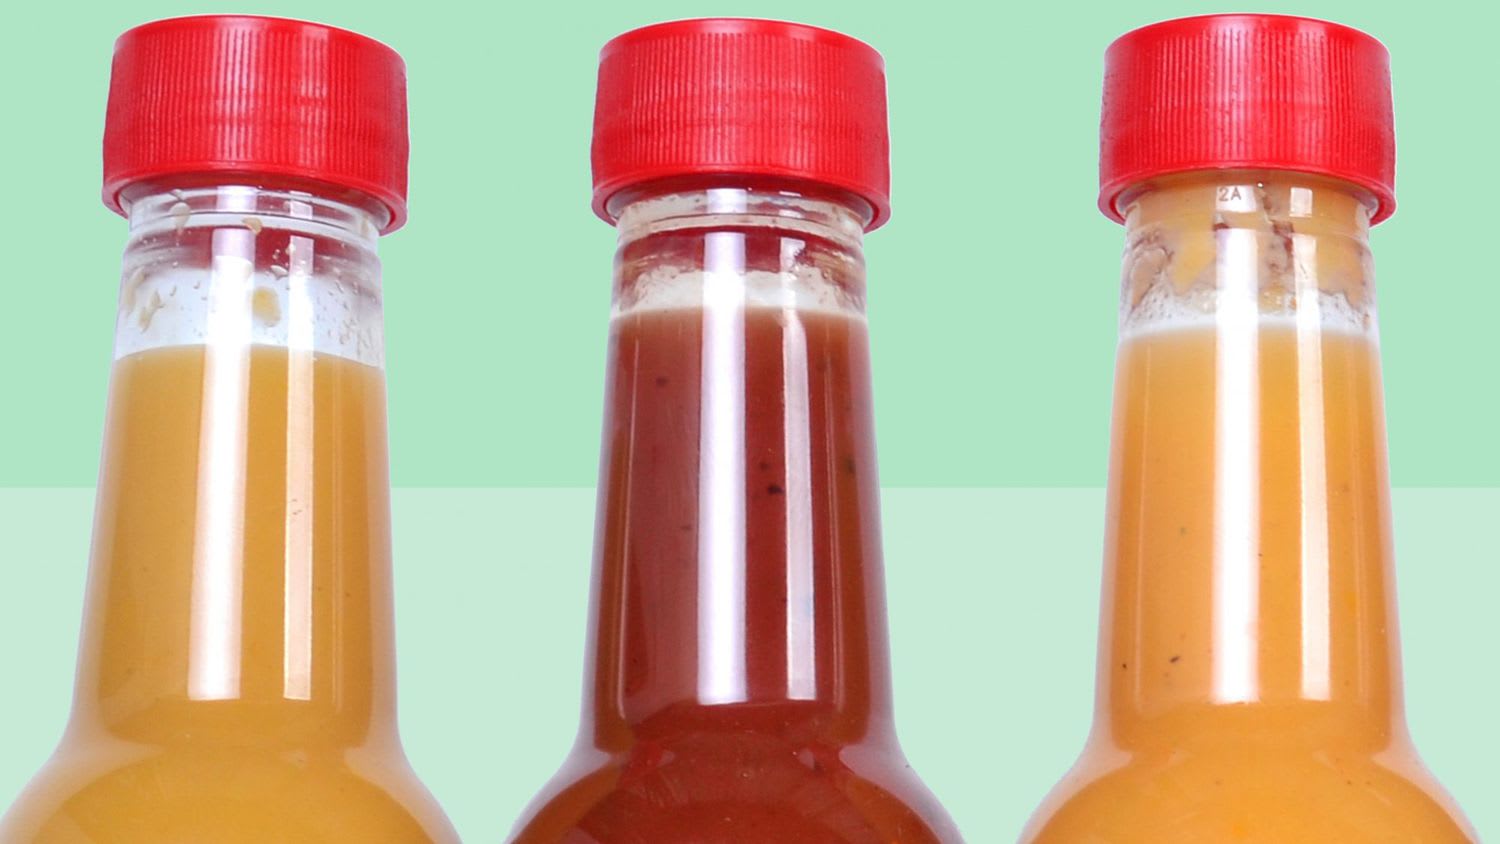 10 Top-Tested Hot Sauces That Will Bring the Heat This Summer